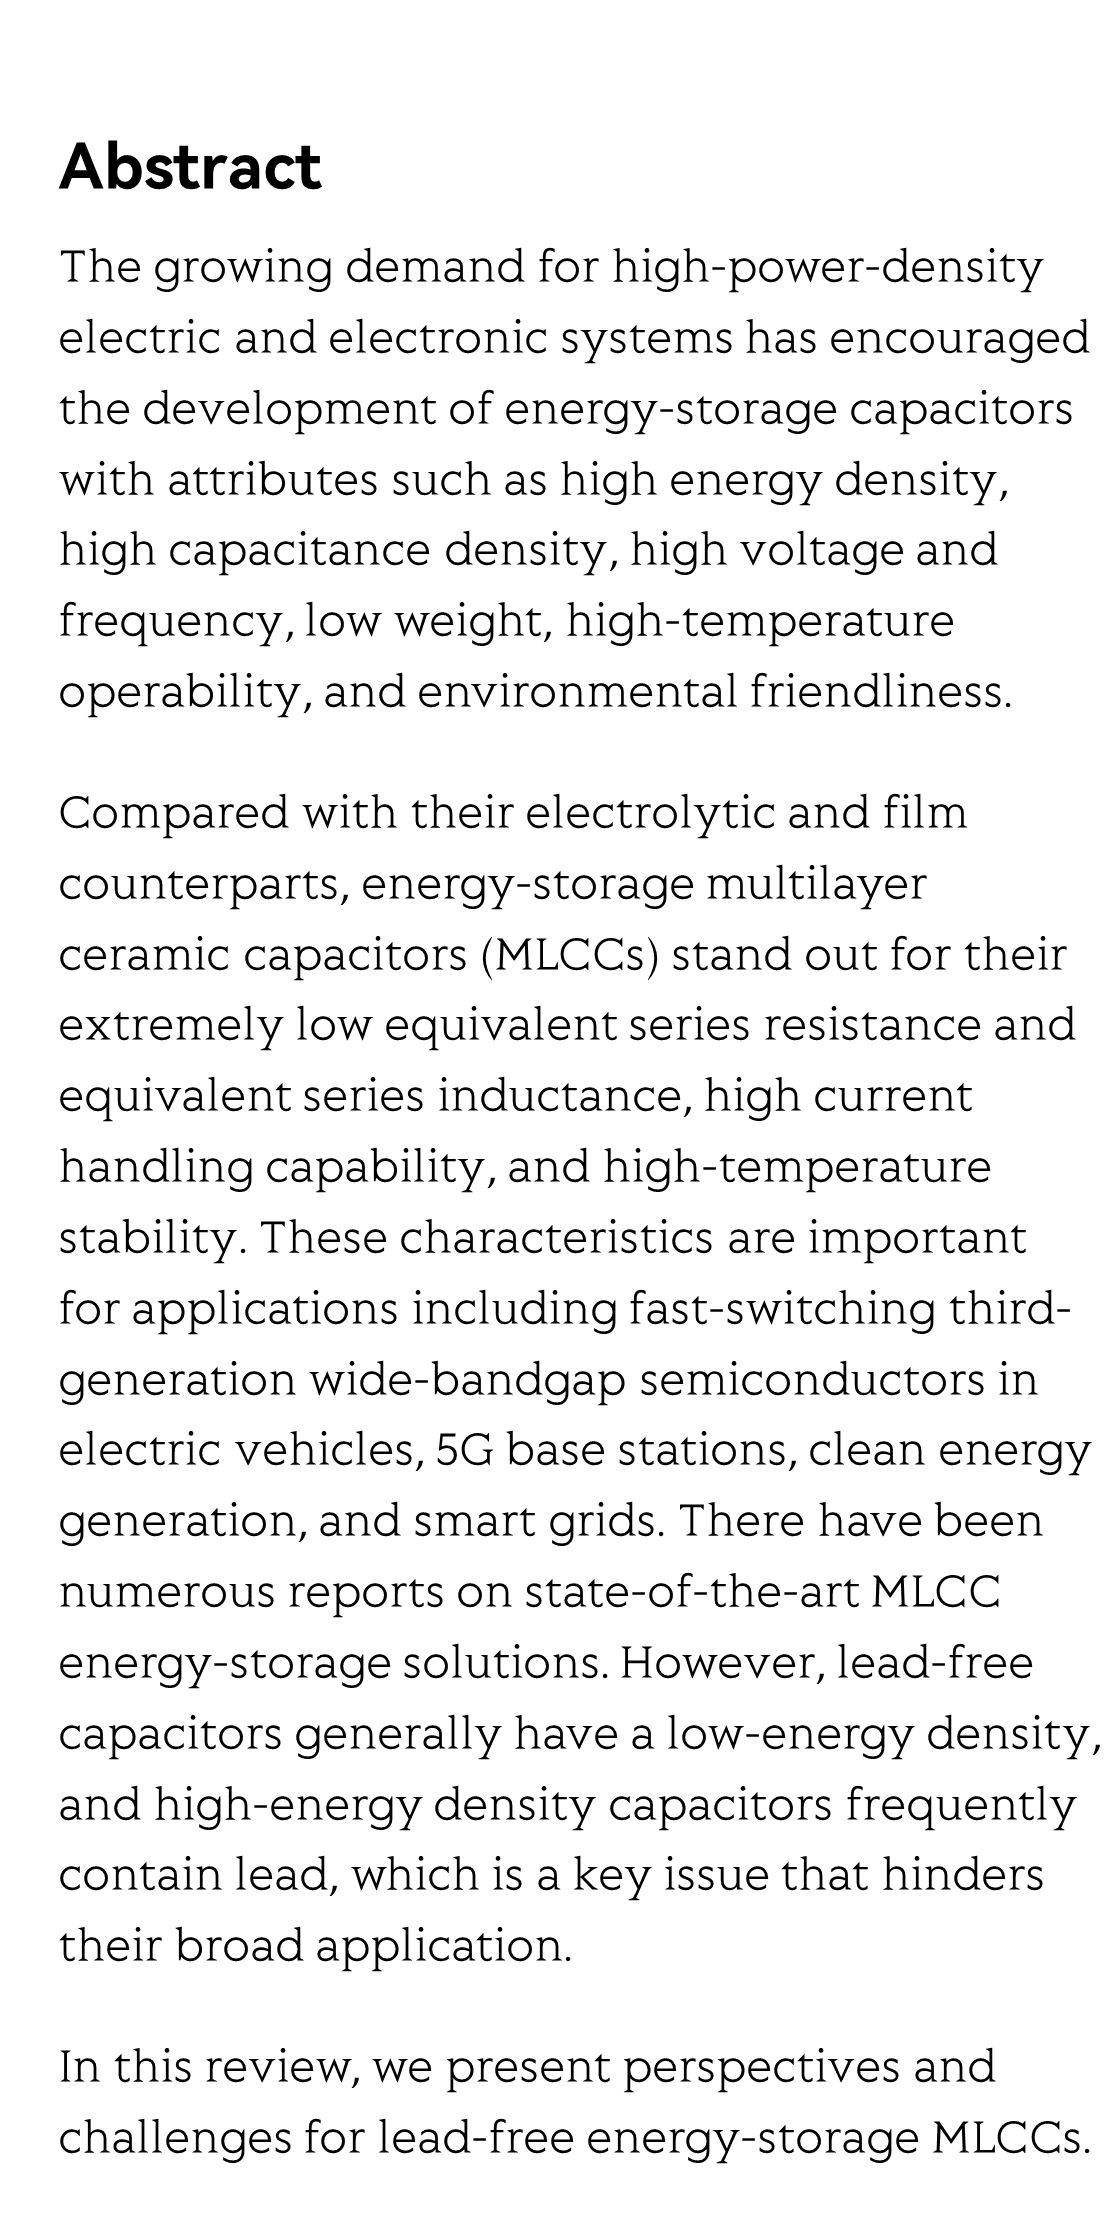 Perspectives and challenges for lead-free energy-storage multilayer ceramic capacitors_2